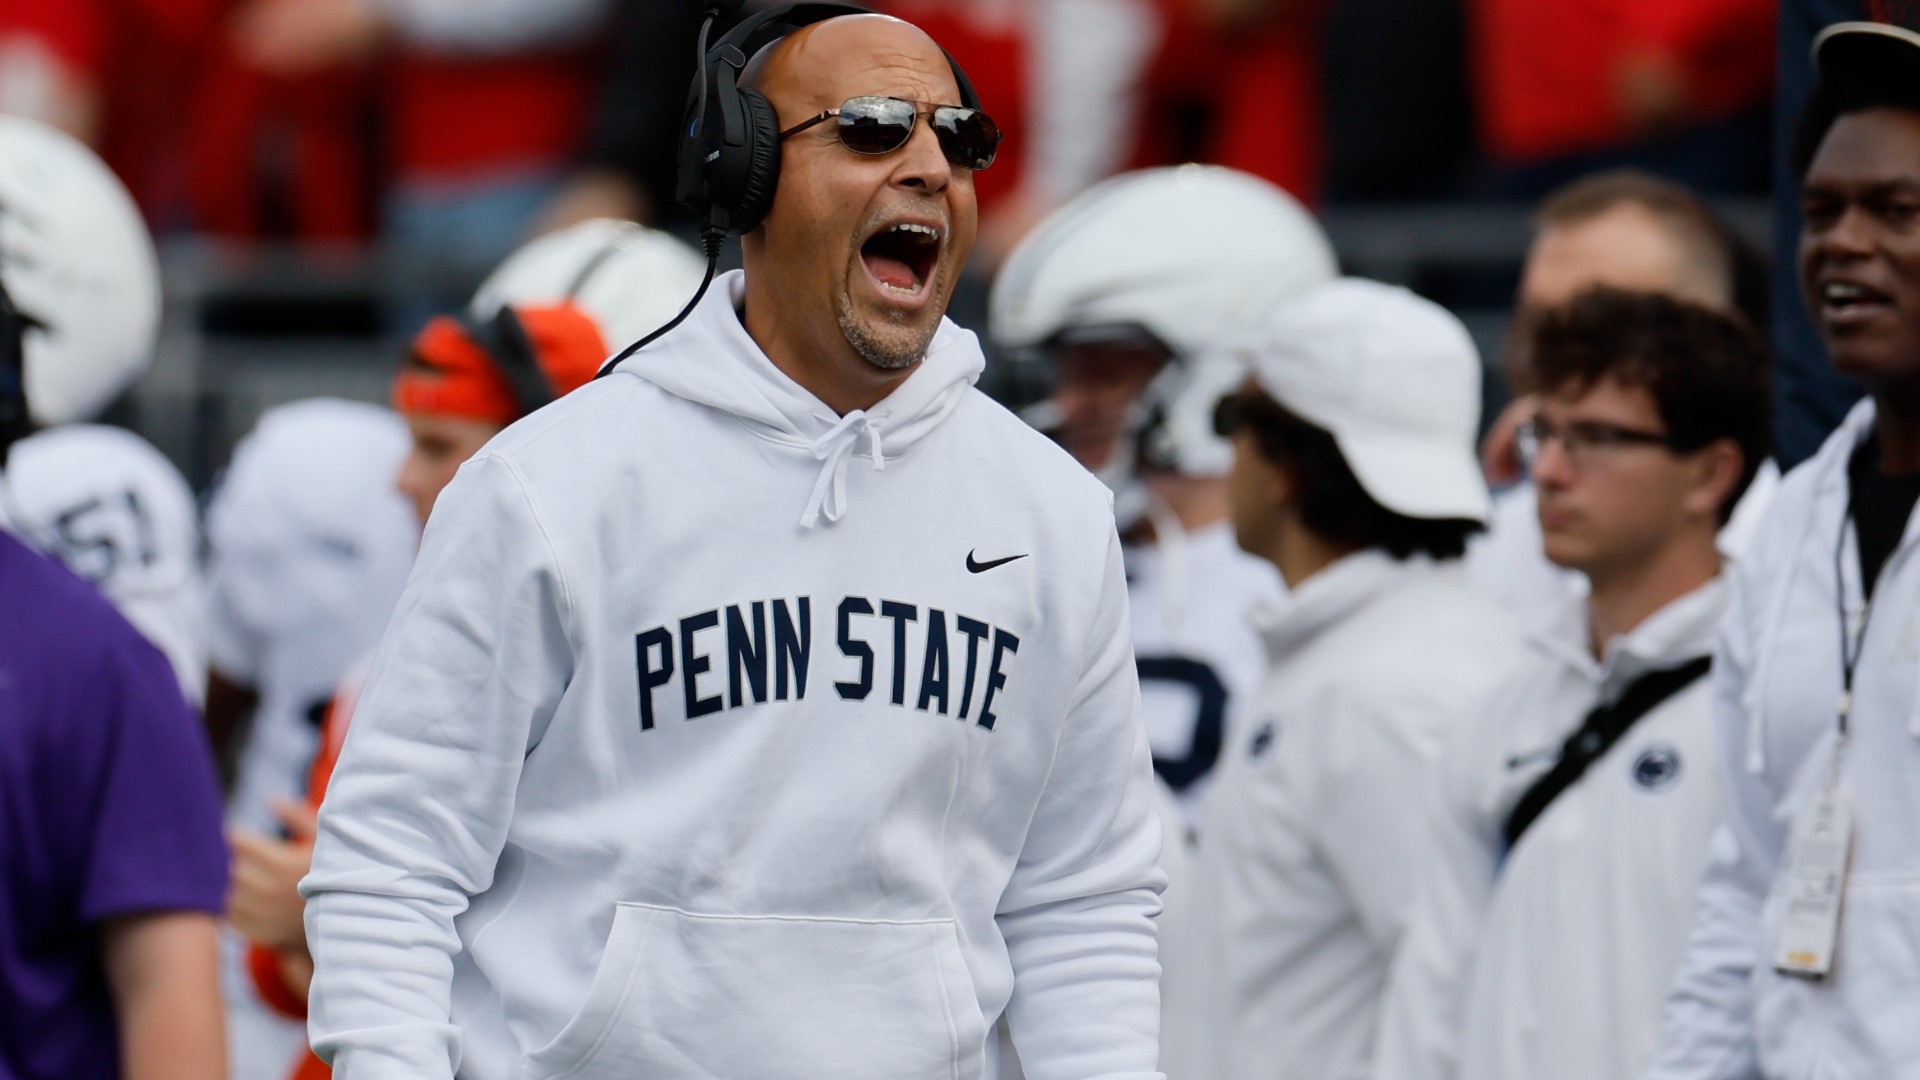 Penn State coach James Franklin spoke after his team lost to Michigan on Saturday.